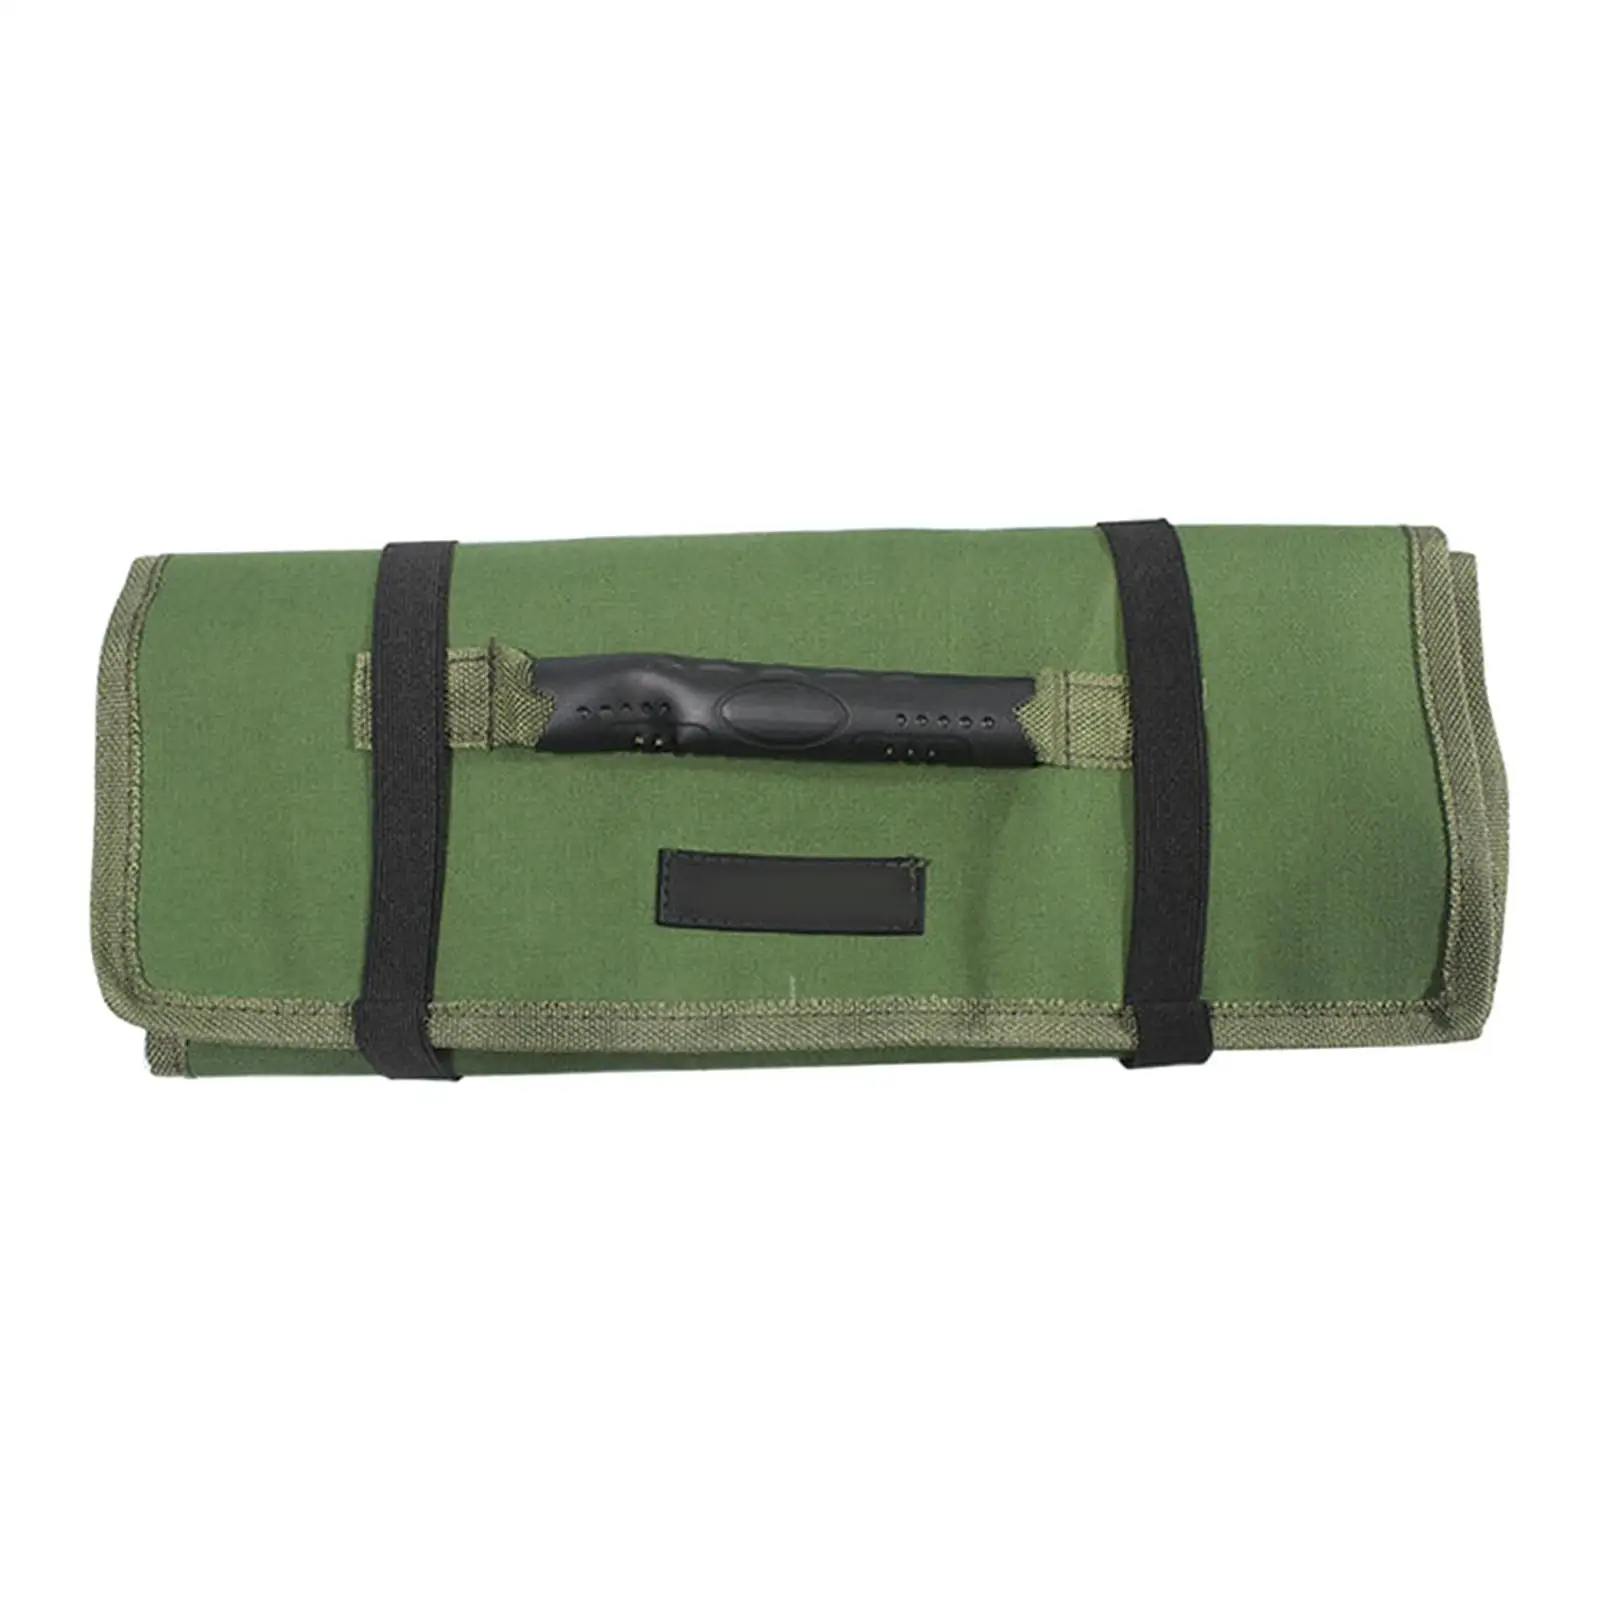 Roll up Tool Bag Organizer Canvas Tool Bag for Household Electrical Tool